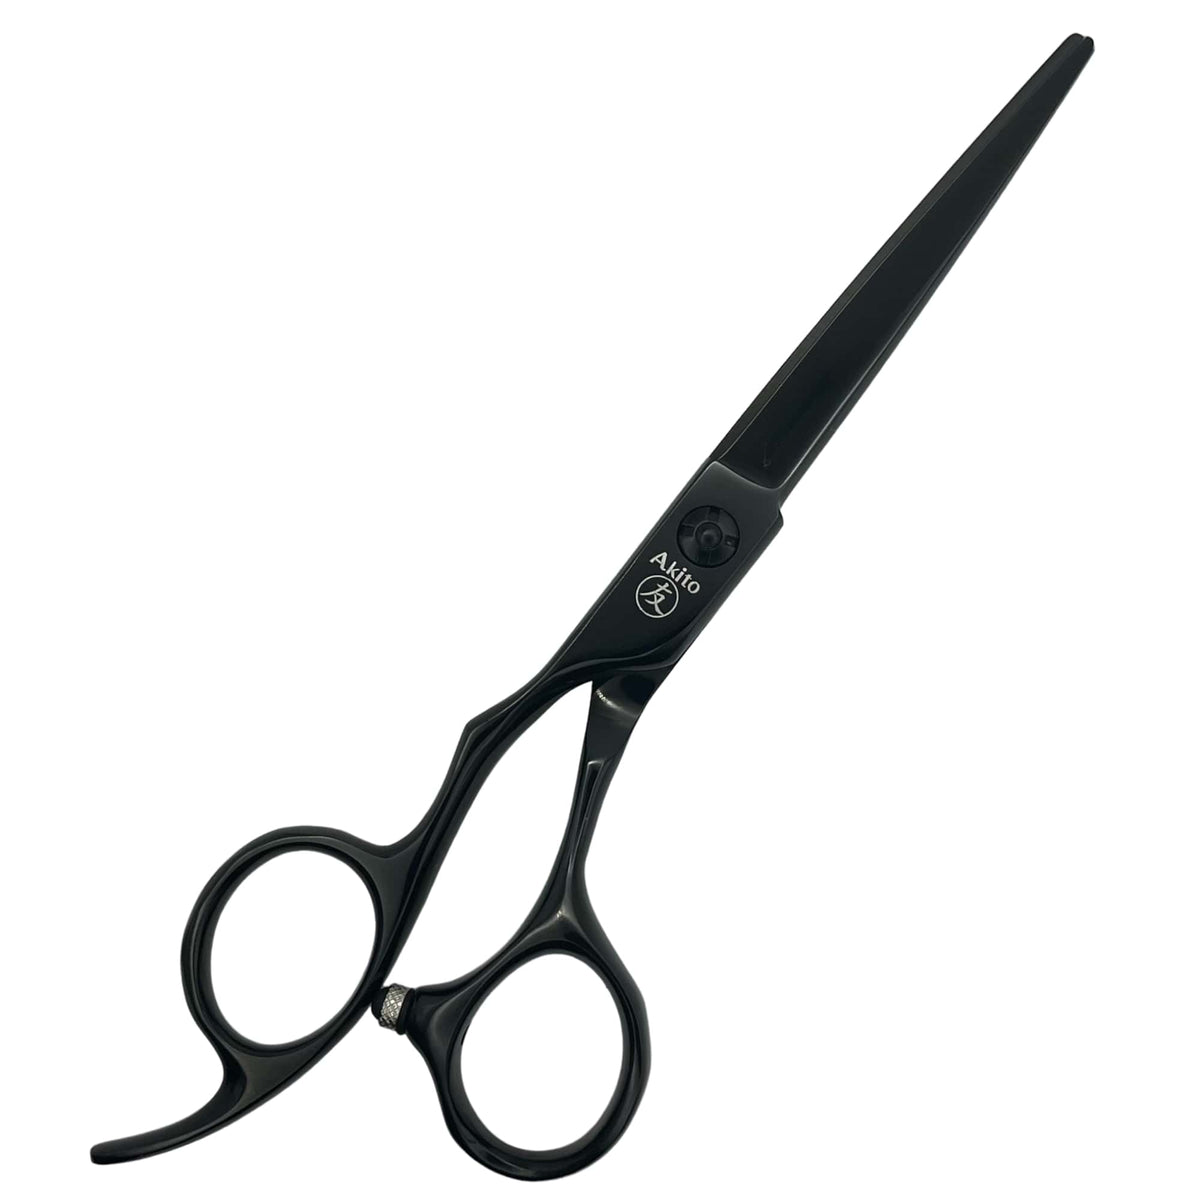 F-2 Black Left Handed Hairdressing Scissors and Hair Cutting Scissors